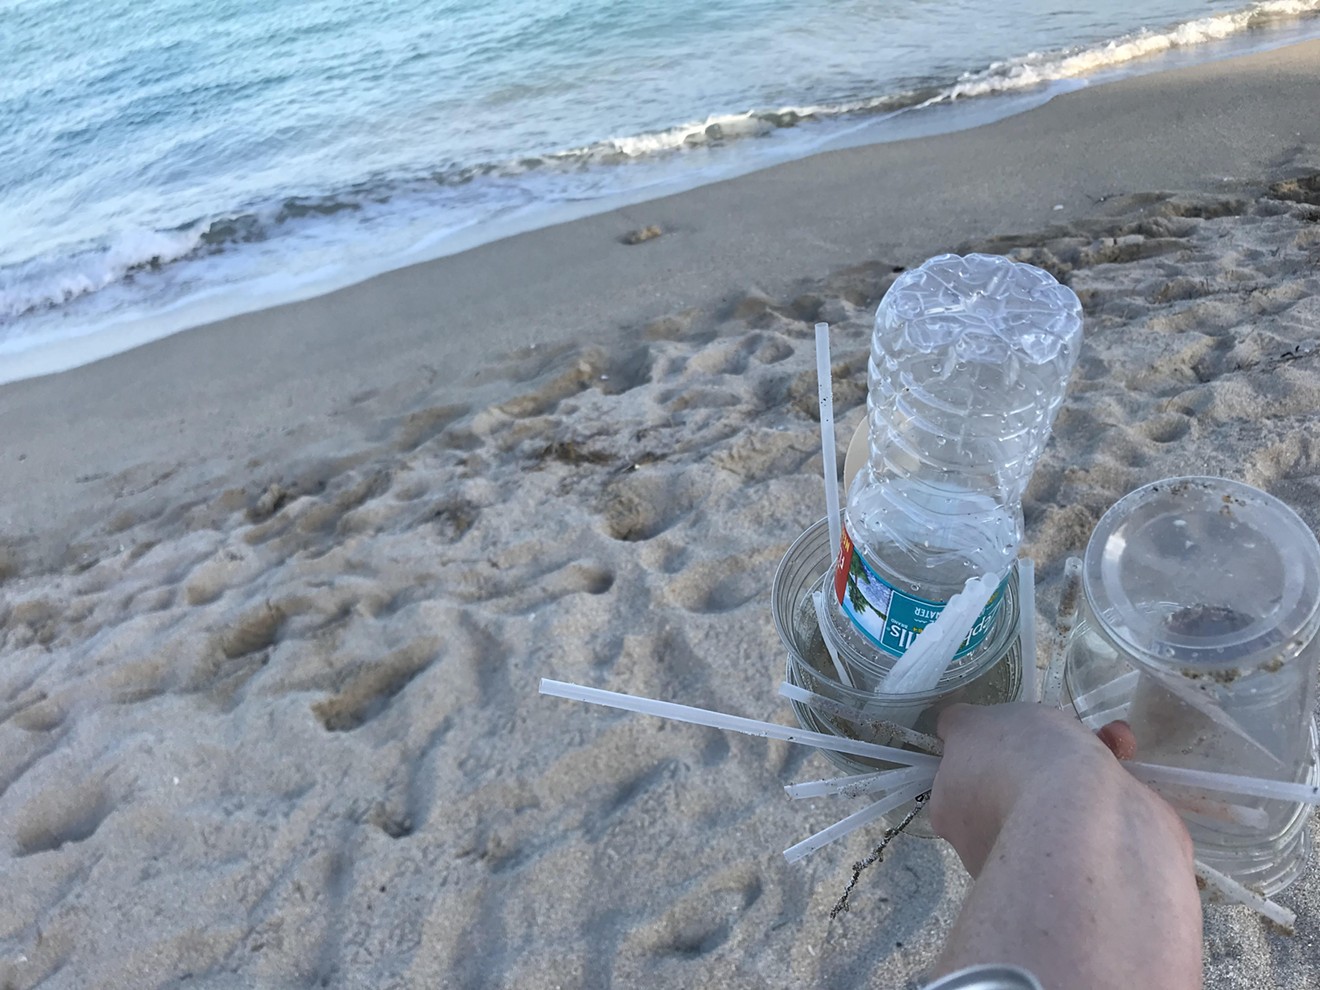 At a beach cleanup in Surfside earlier this year, Jennifer Rotker found dozens of plastic straws littering the shore.